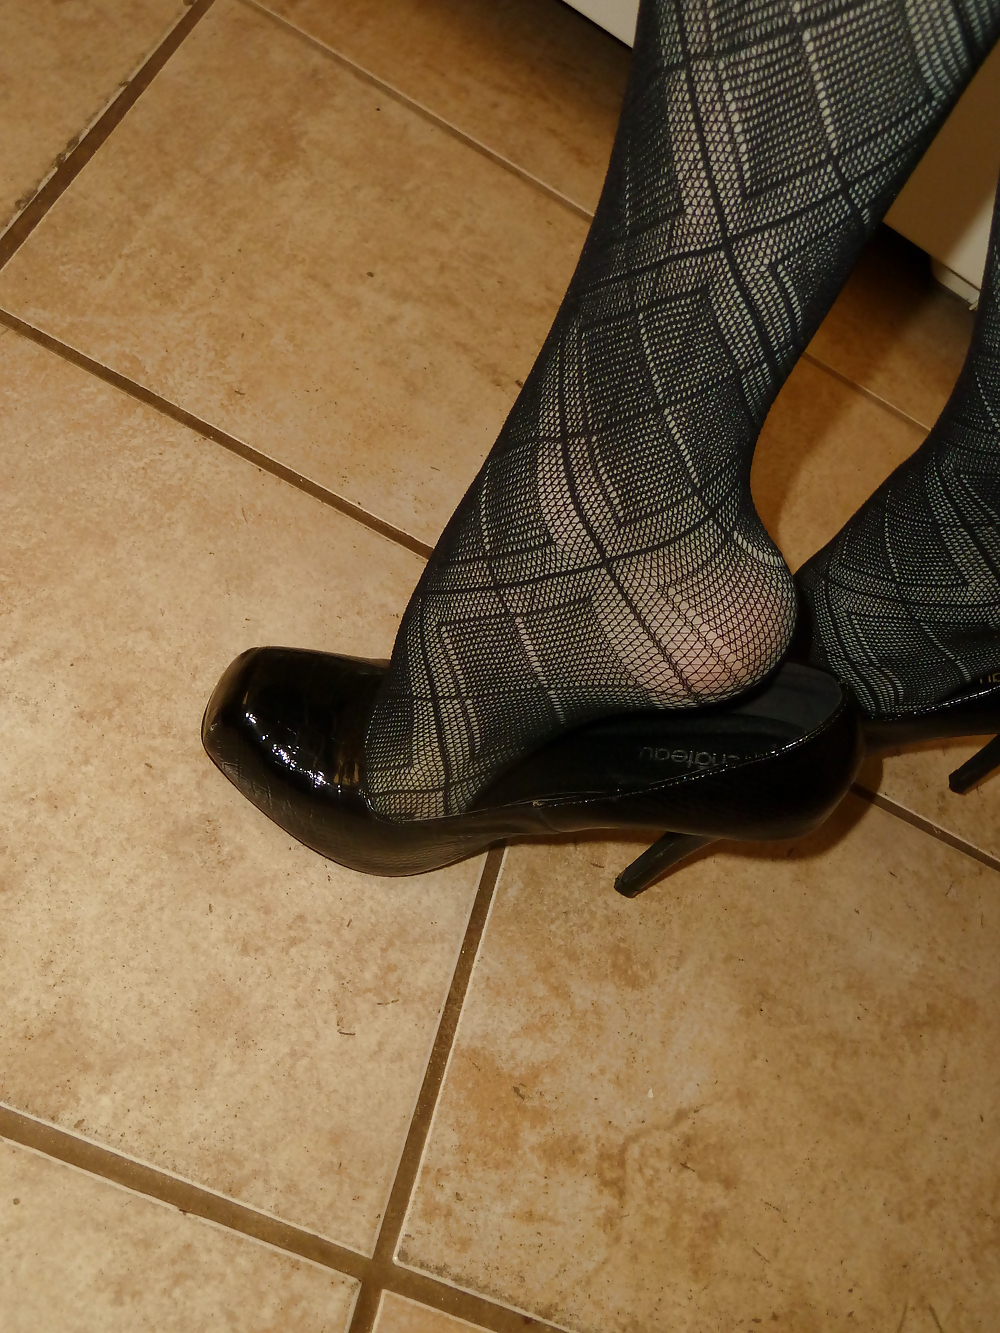 The perfect feet in stockings #36163108